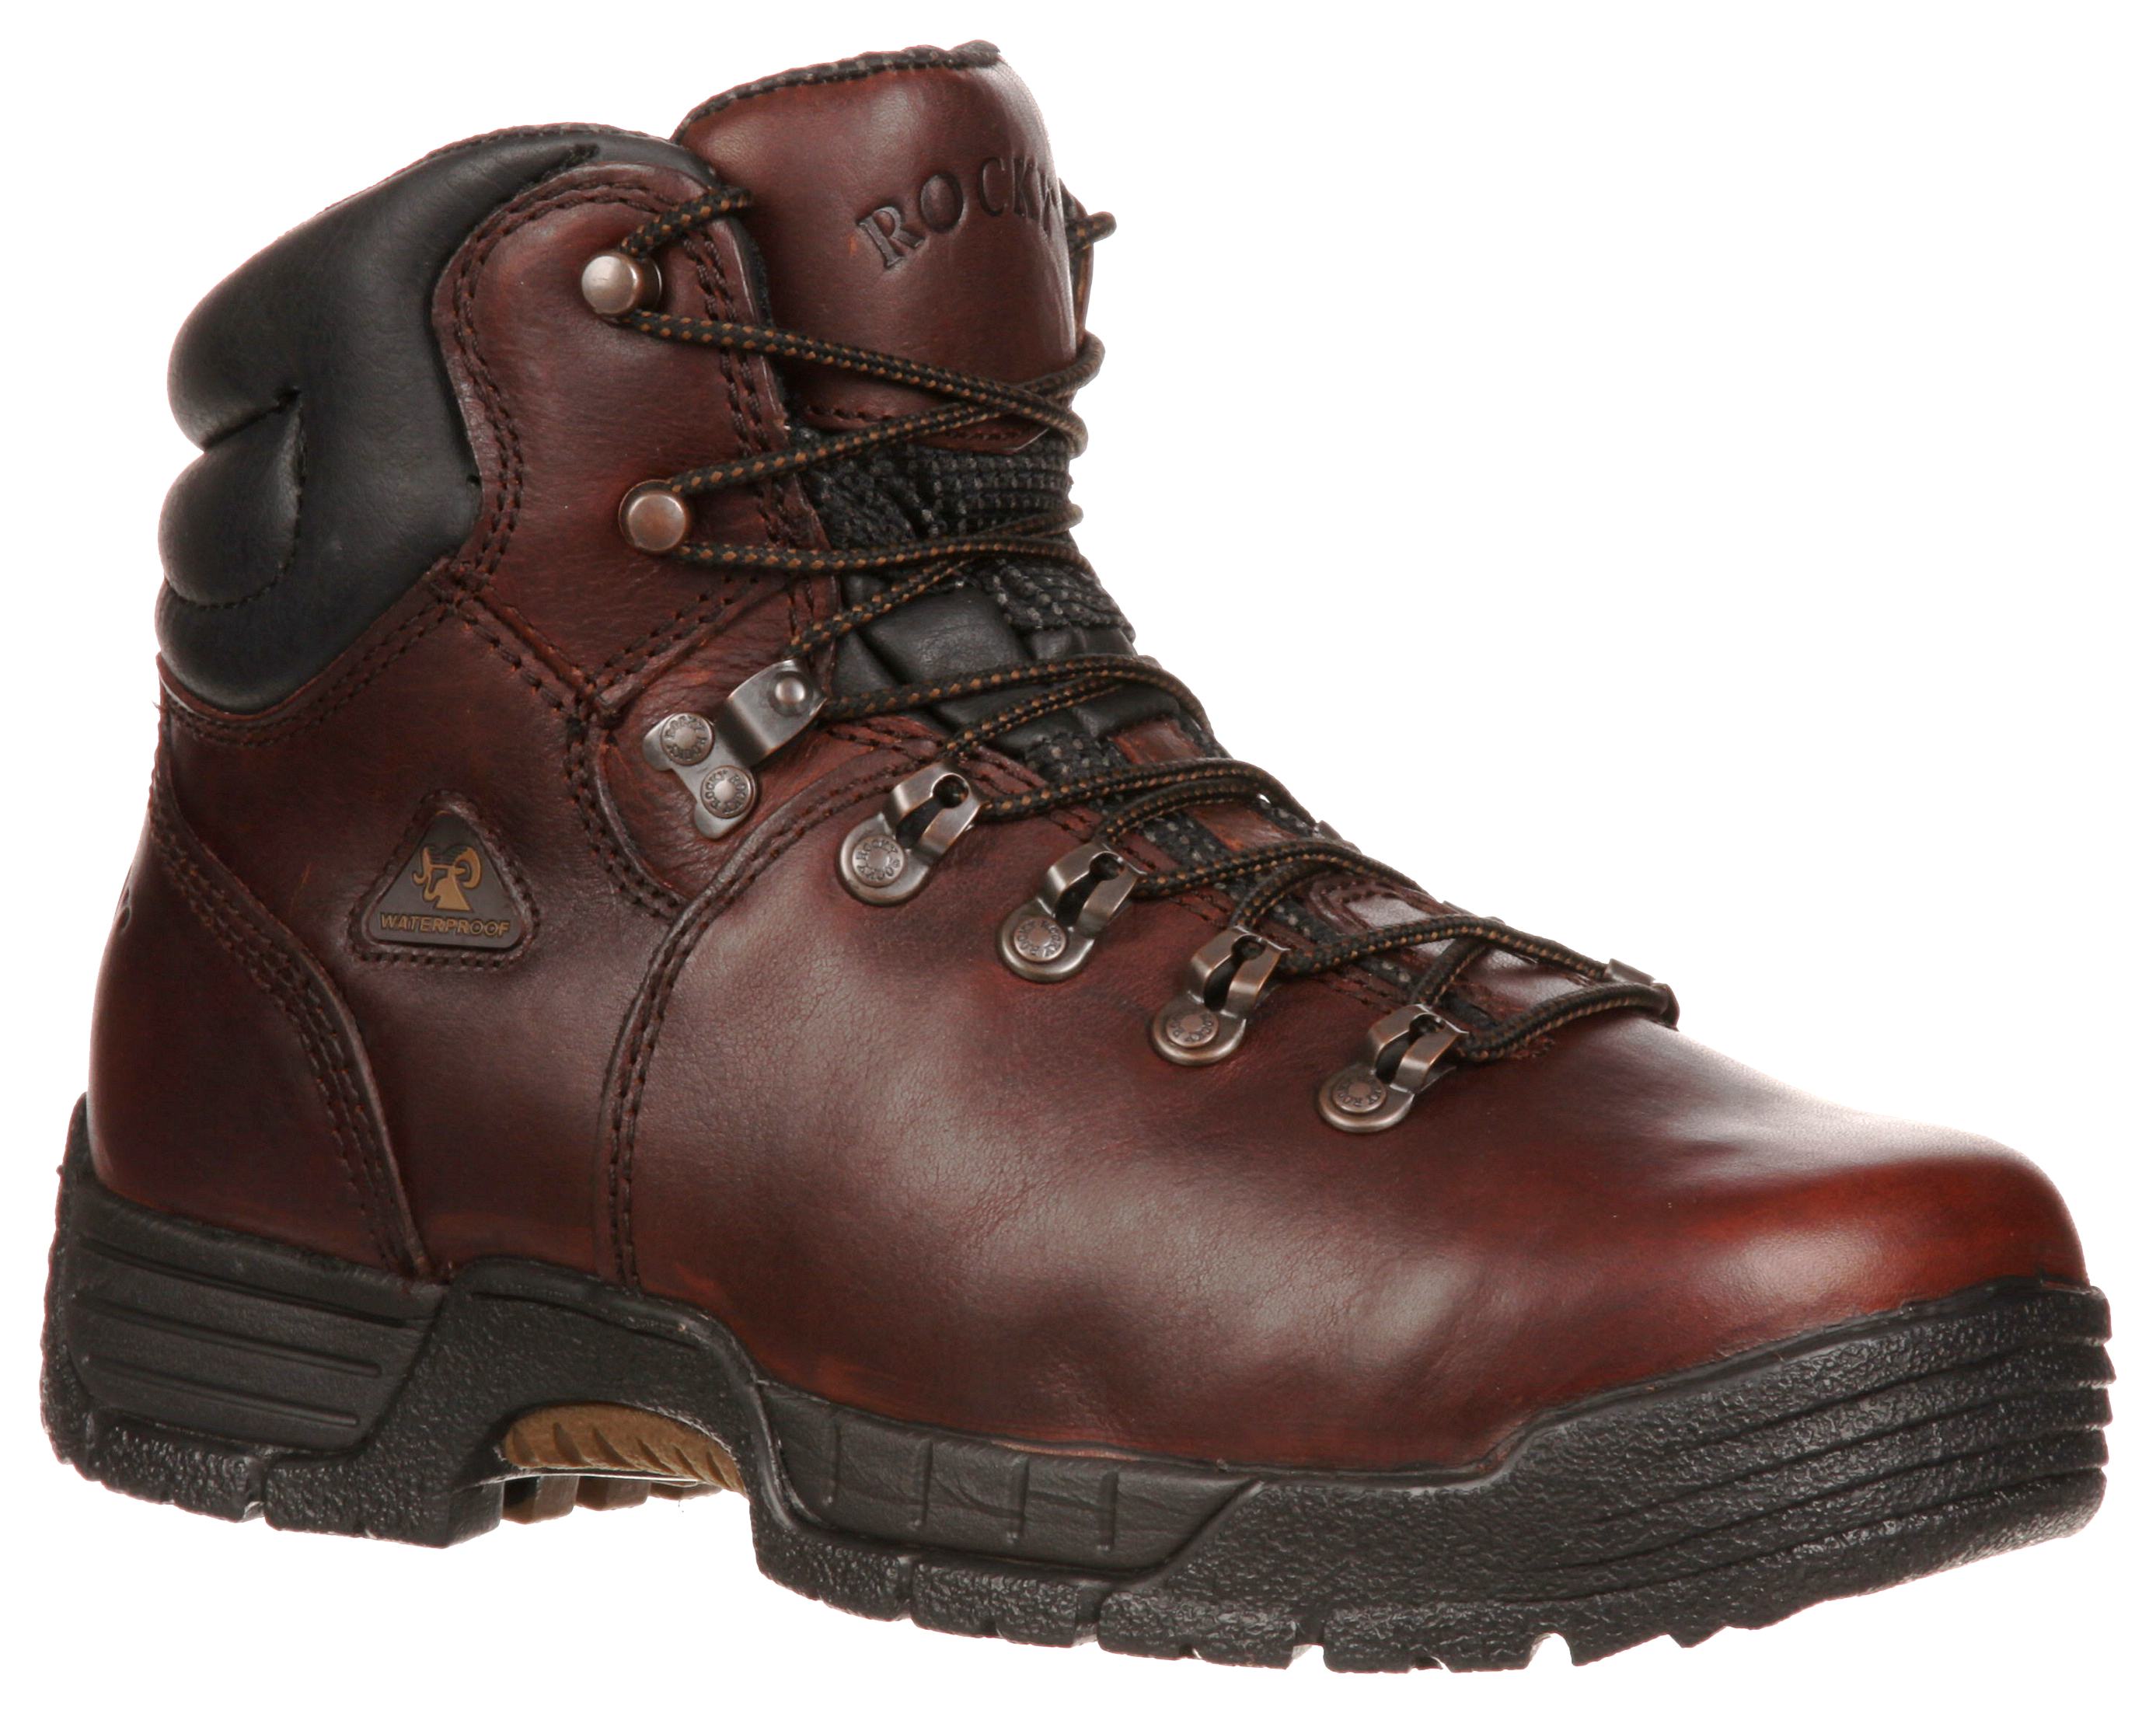 ROCKY MobiLite Waterproof Work Boots for Men - Brown - 11 M